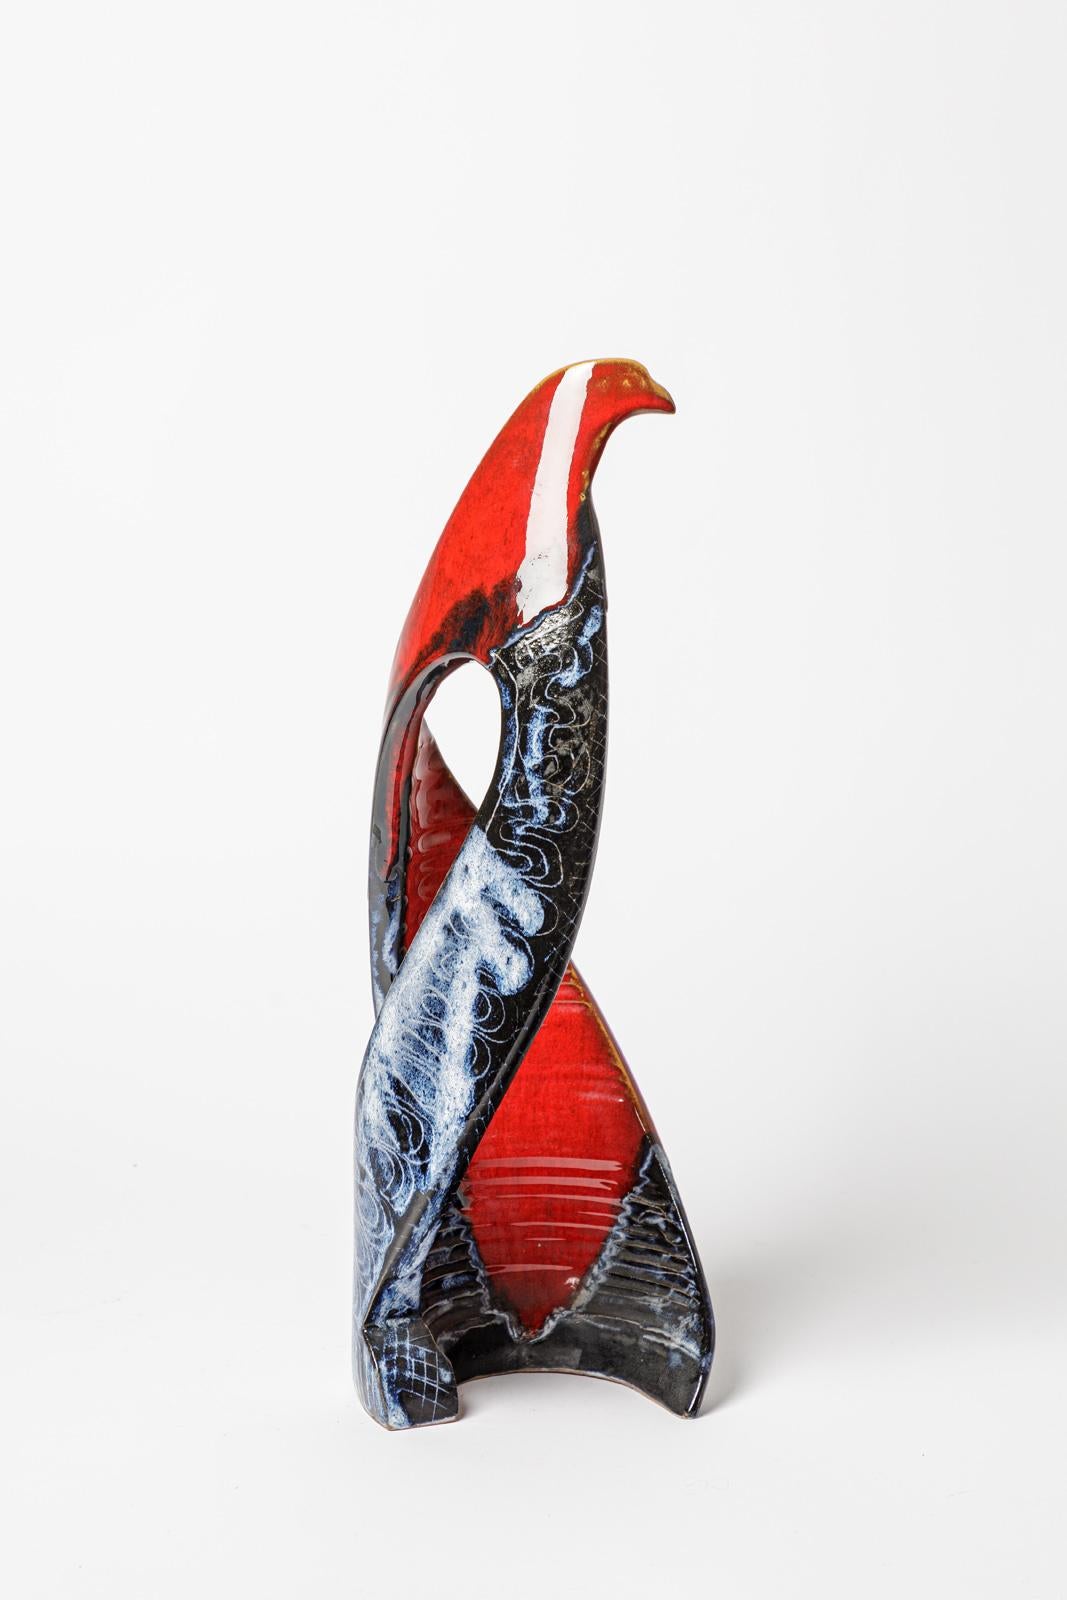 Red and Blue 20th Century Abstract Ceramic Bird Sculpture by Jean Austruy 1950 In Excellent Condition For Sale In Neuilly-en- sancerre, FR